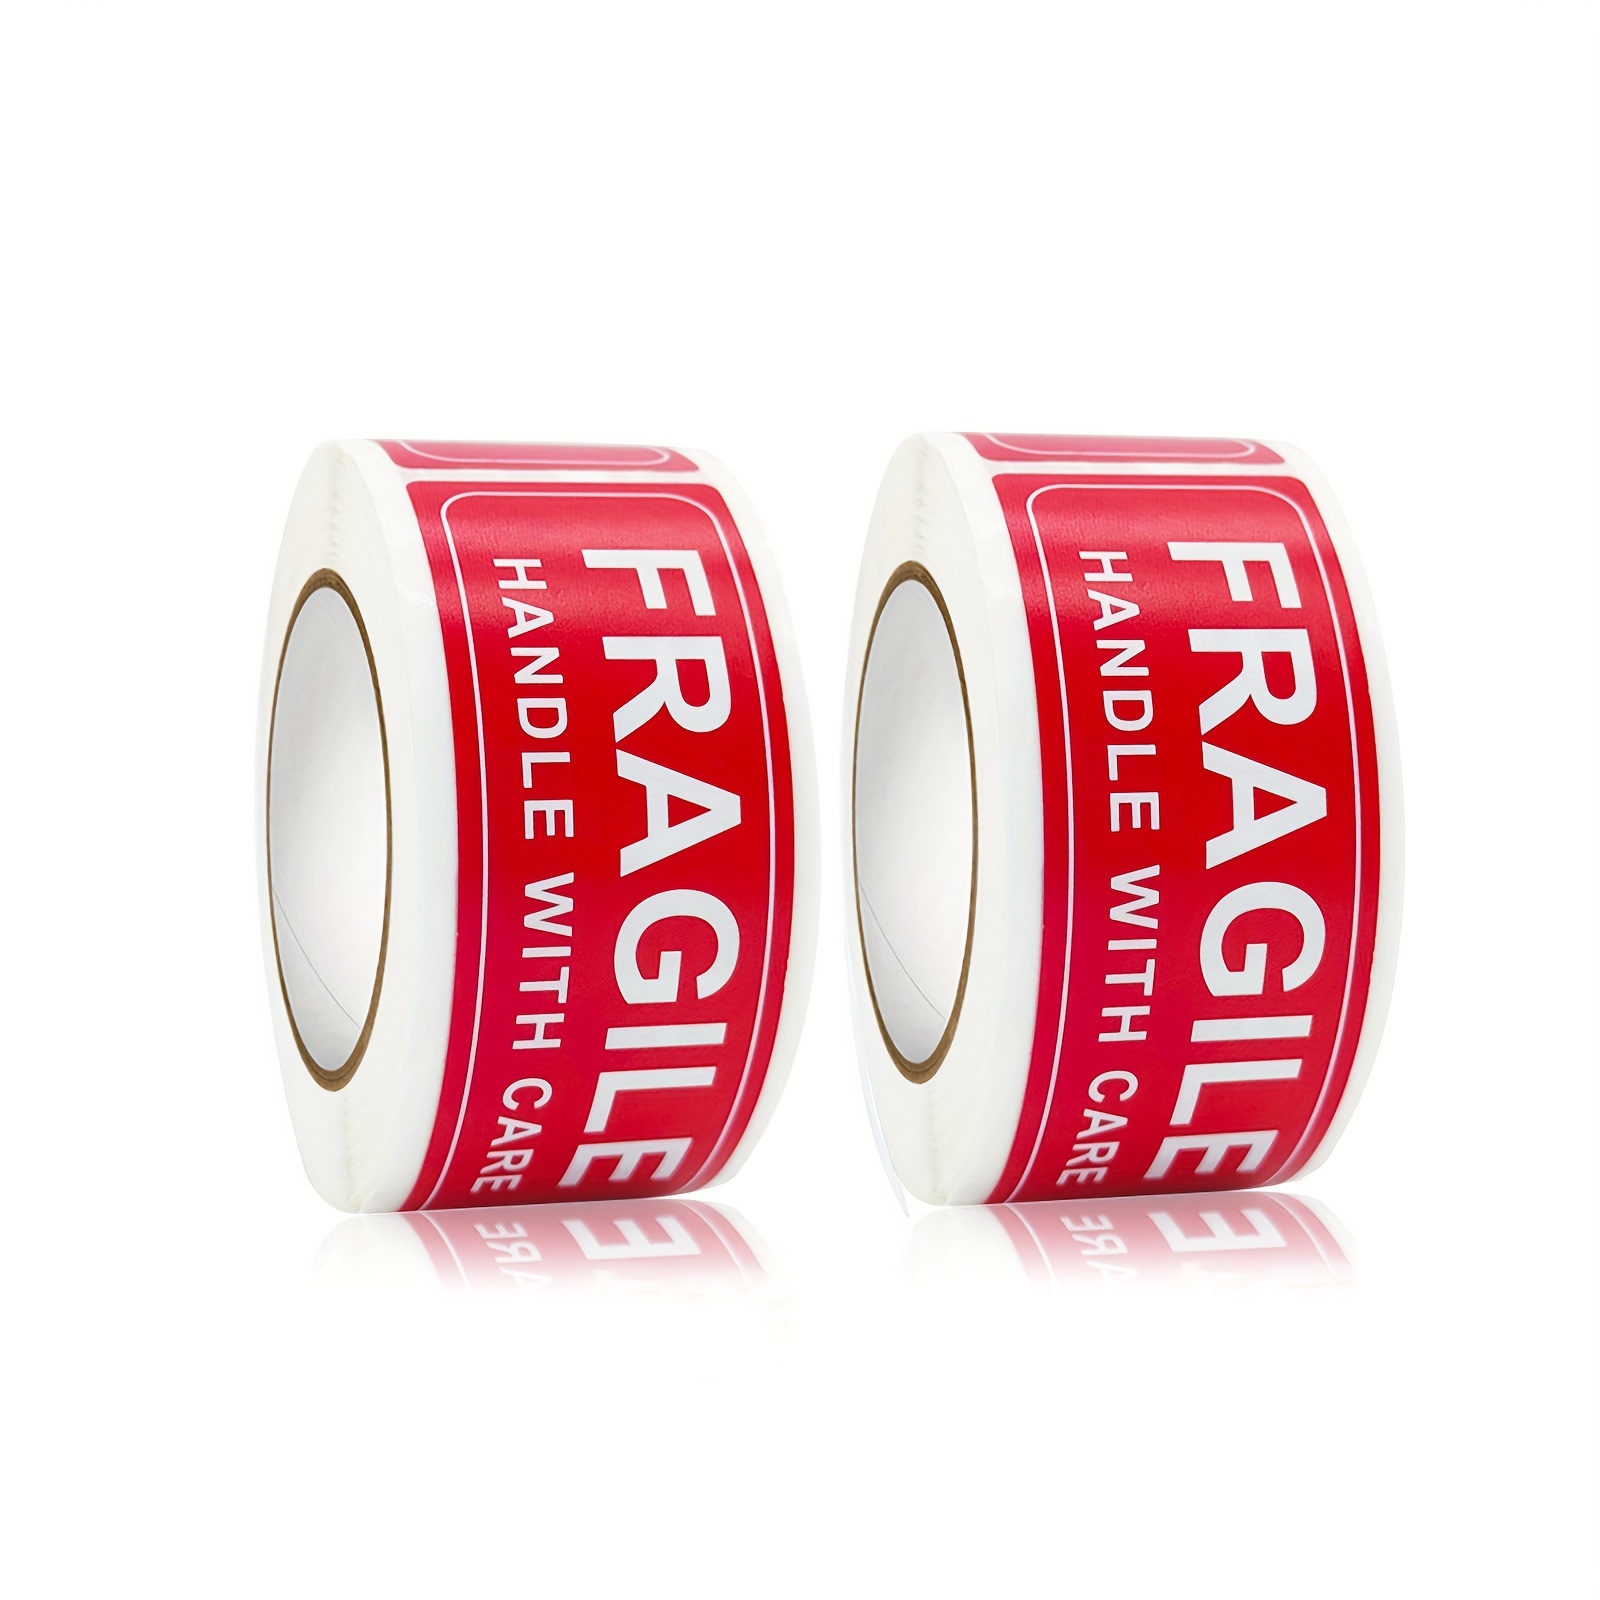 FRAGILE Handle With Care Labels with DO NOT BEND - Self adhesive Stickers